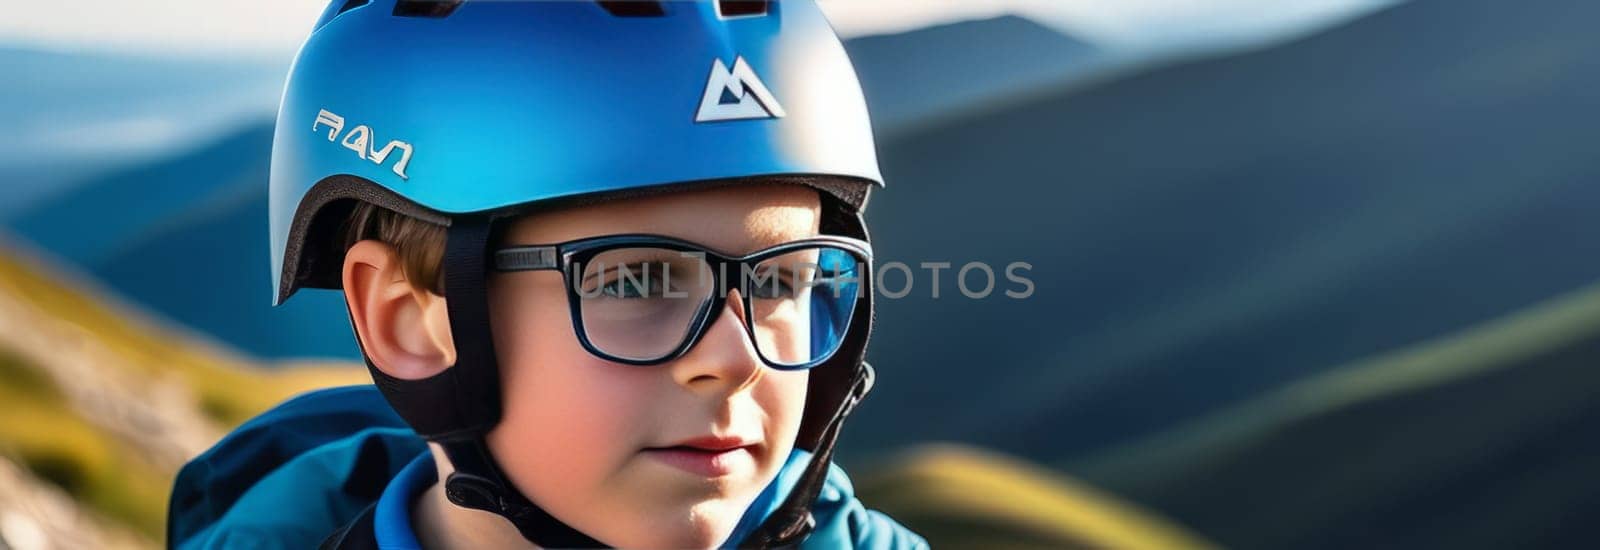 Young boy wearing helmet and glasses stands confidently before towering mountain backdrop ready for adventure and exploration. He may be gearing up for bicycle ride or some other outdoor activity. by Angelsmoon